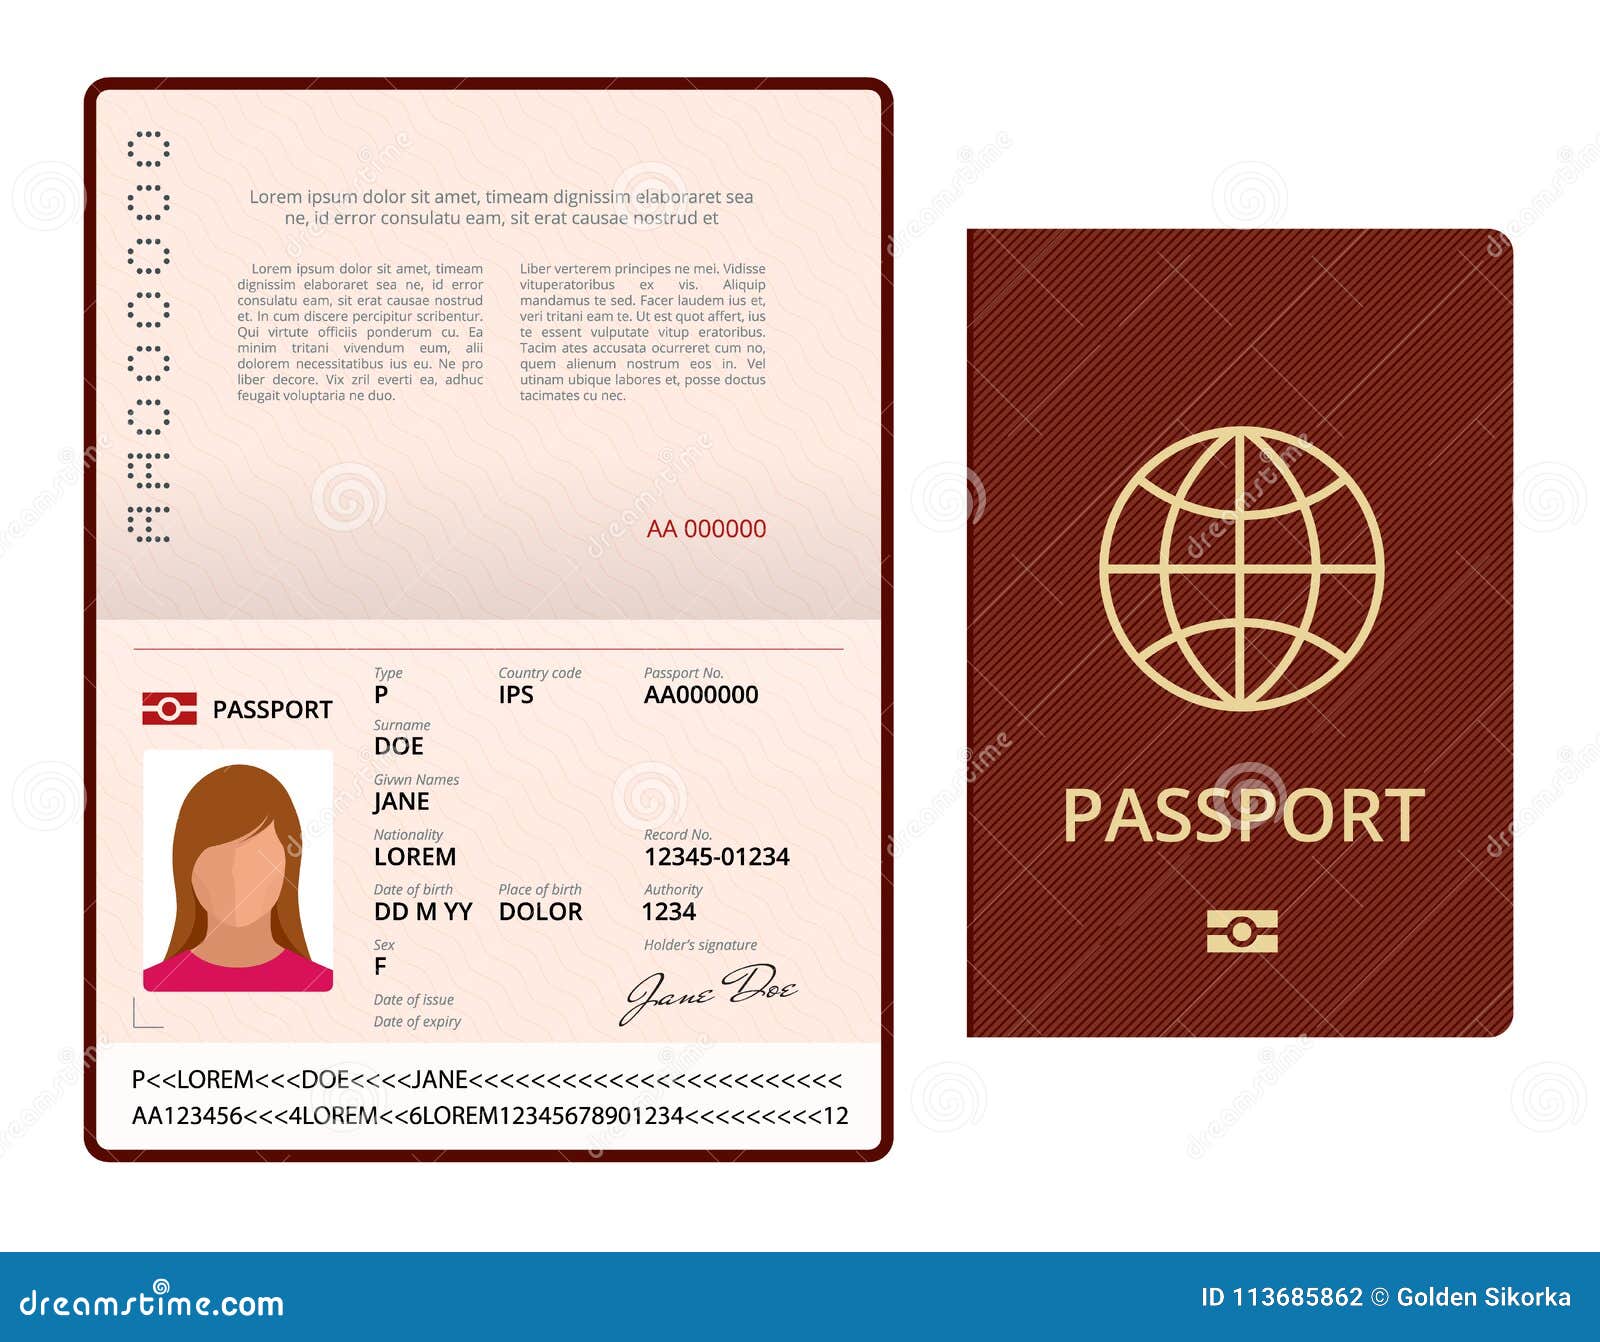  blank open passport template. international passport with sample personal data page. document for travel and